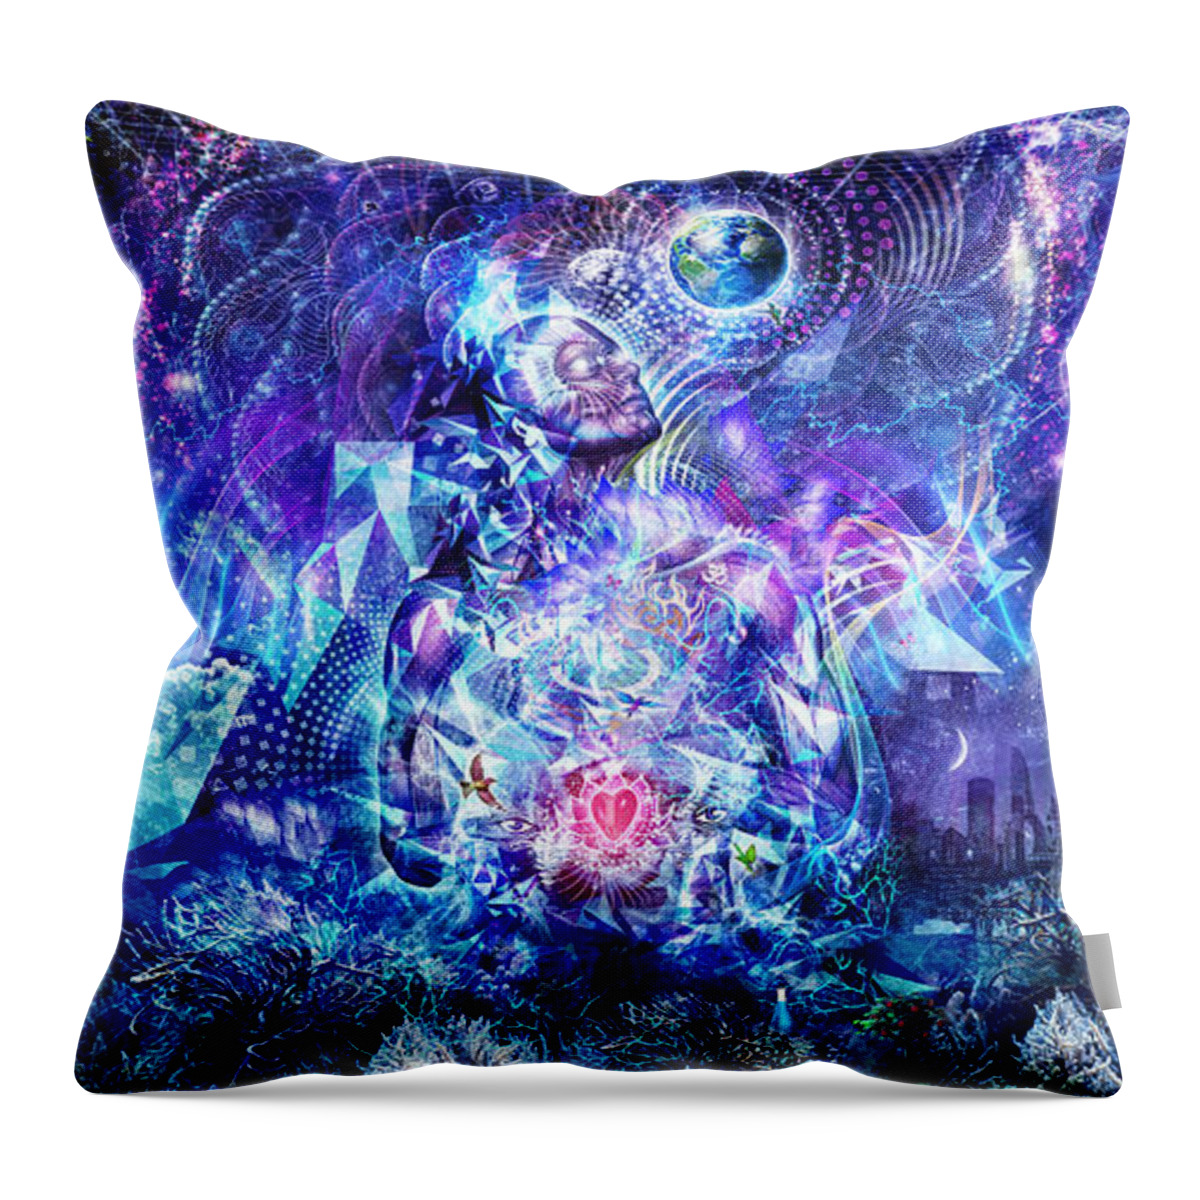 Blue Throw Pillow featuring the digital art Transcension by Cameron Gray